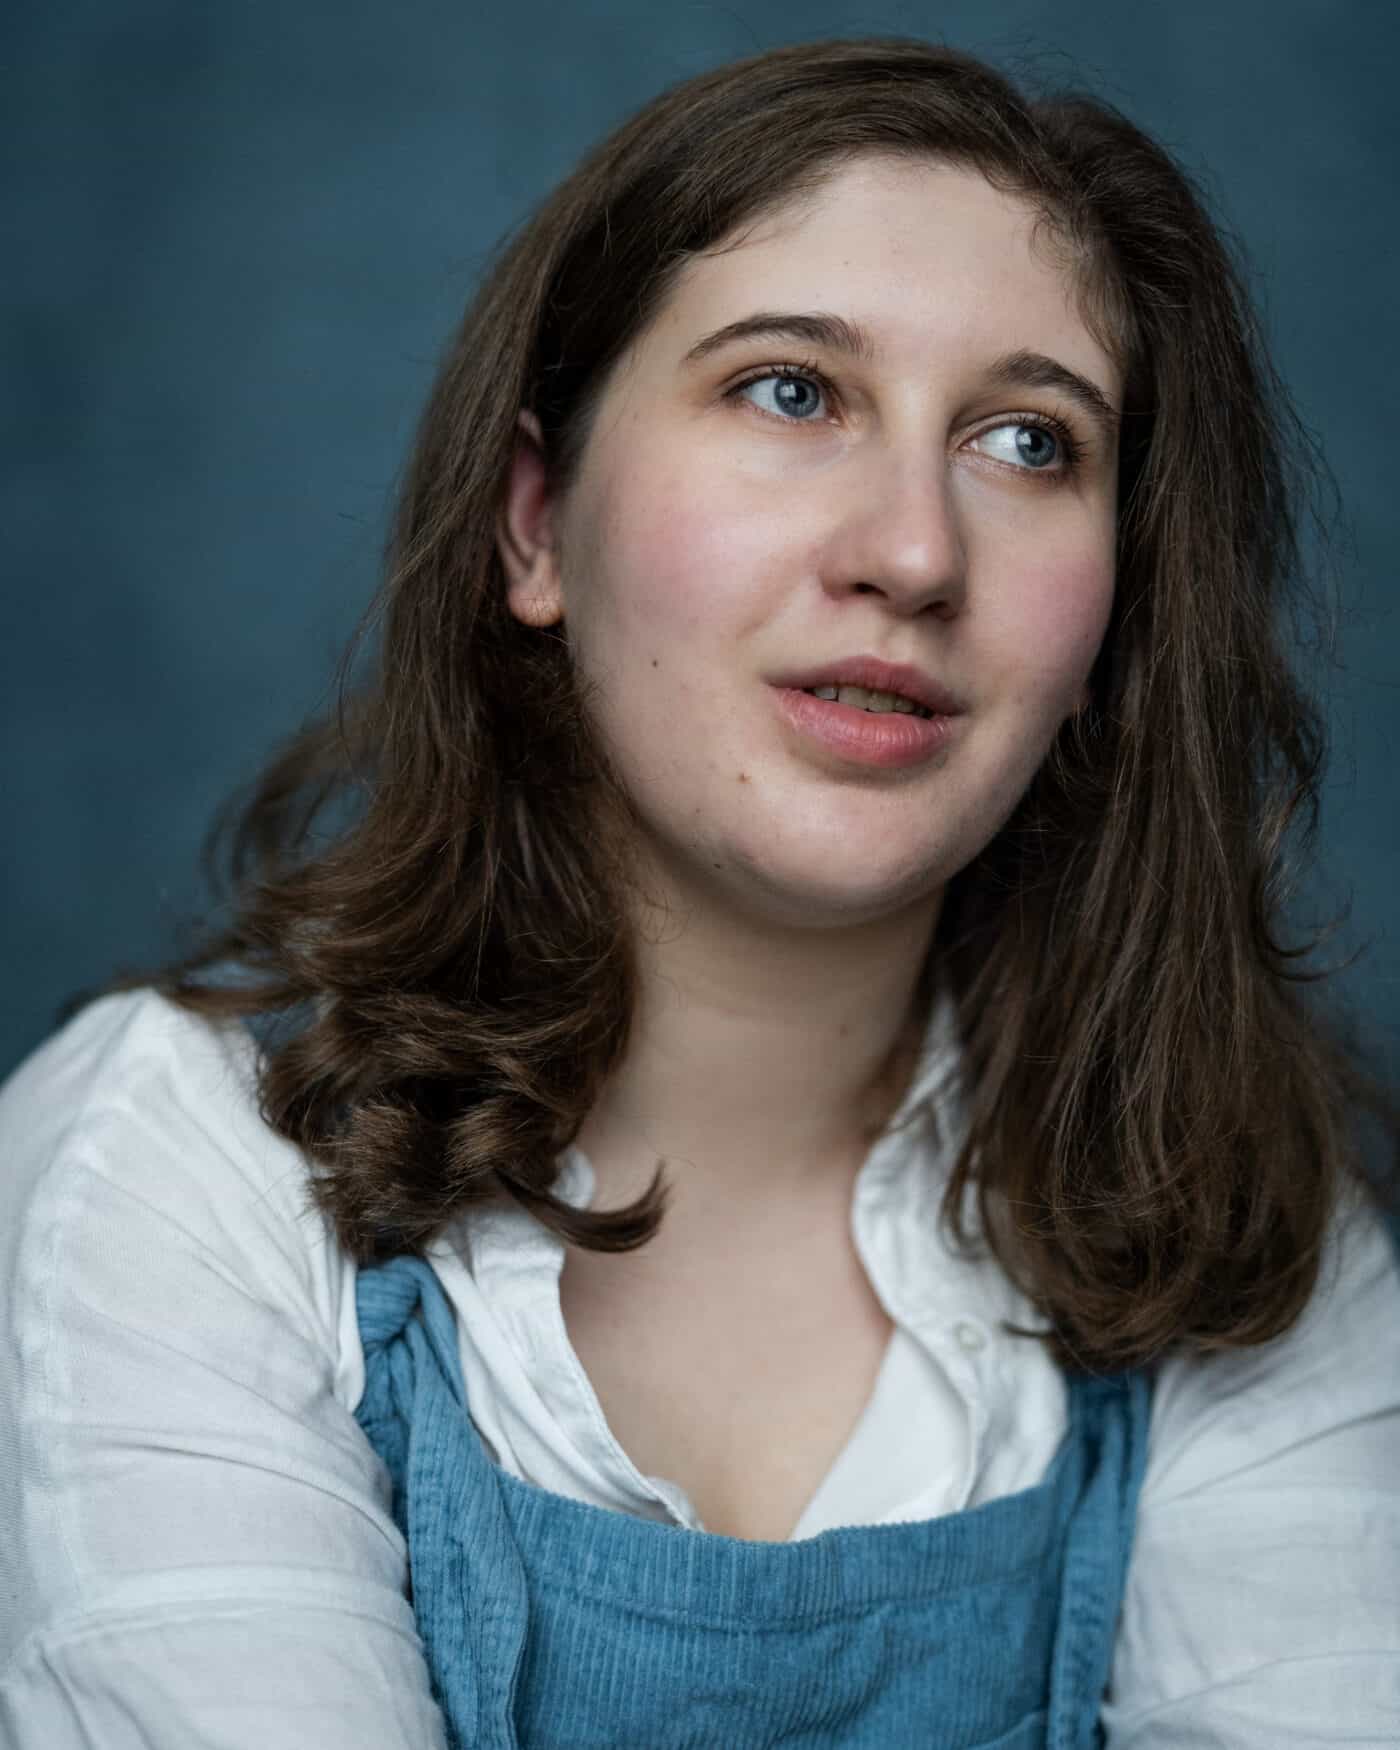 Terri Donovan. Headshot of a young white person with shoulder length brown hair and grey eyes. They are wearing a white button down shirt and blue dungarees. They are looking away from the camera.